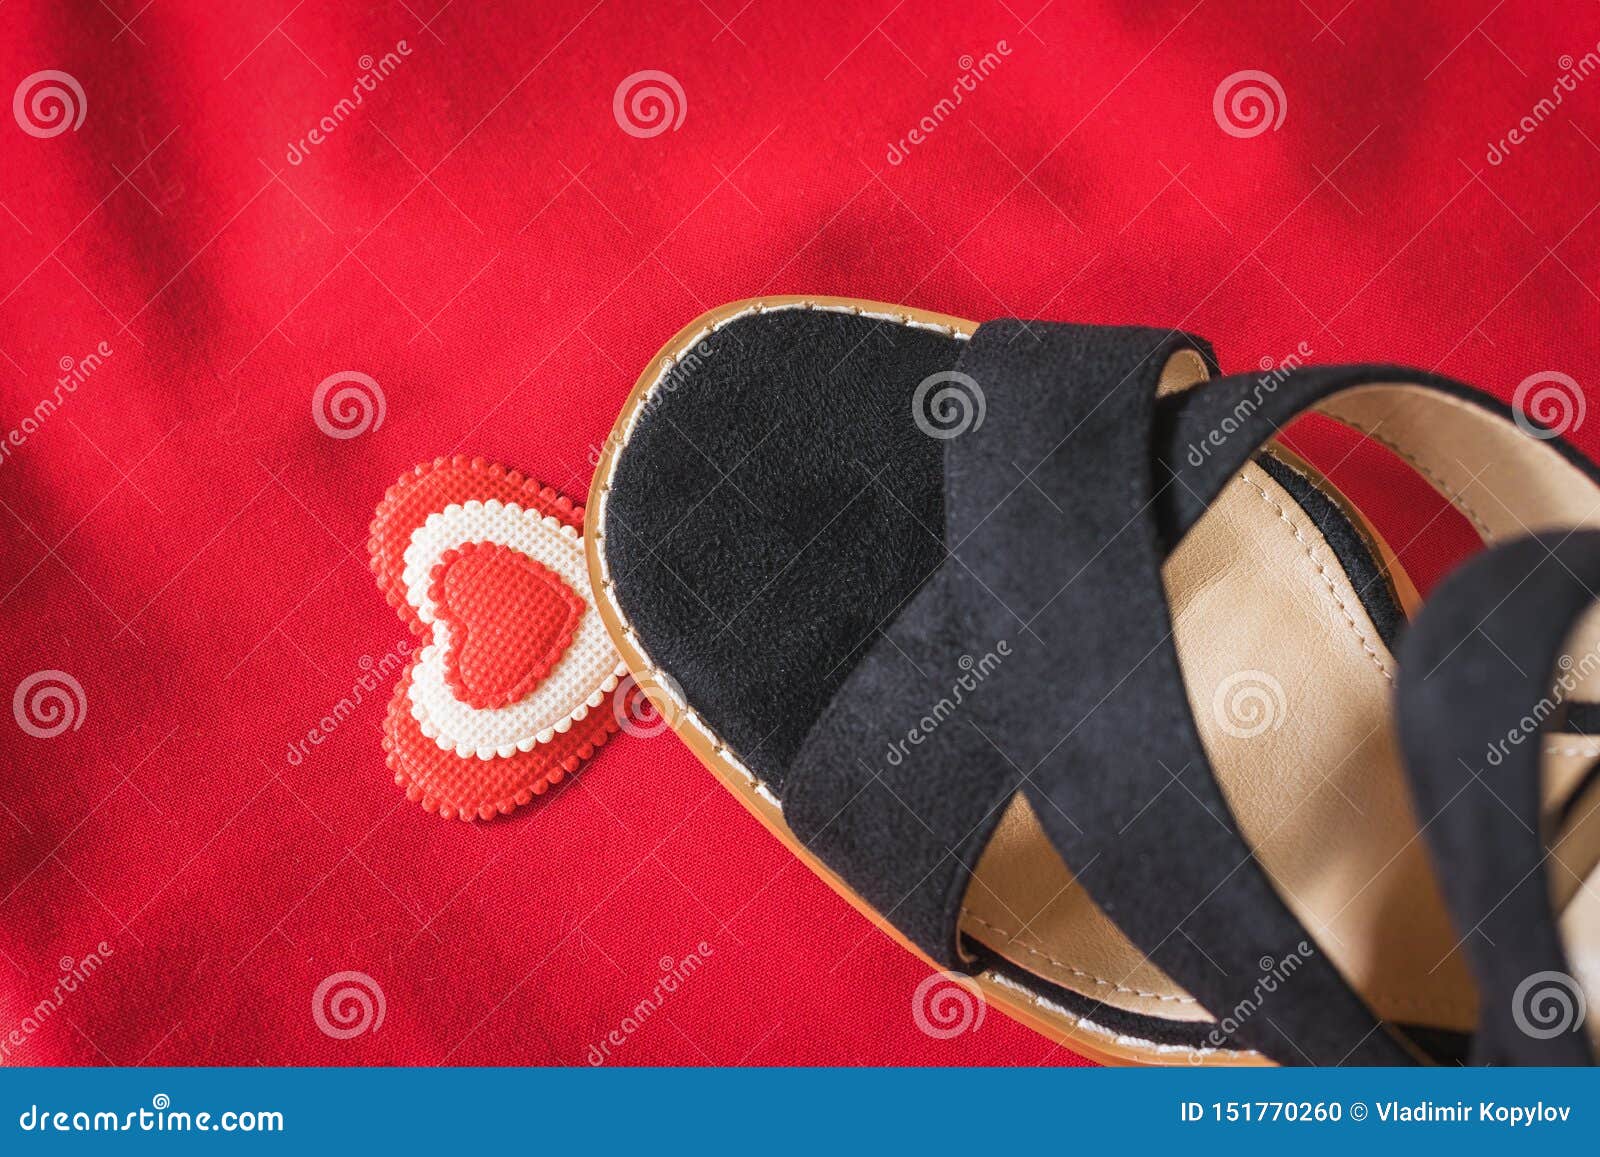 A Black Woman`s Shoe Steps on the Heart on a Red Background. Flat Lay ...